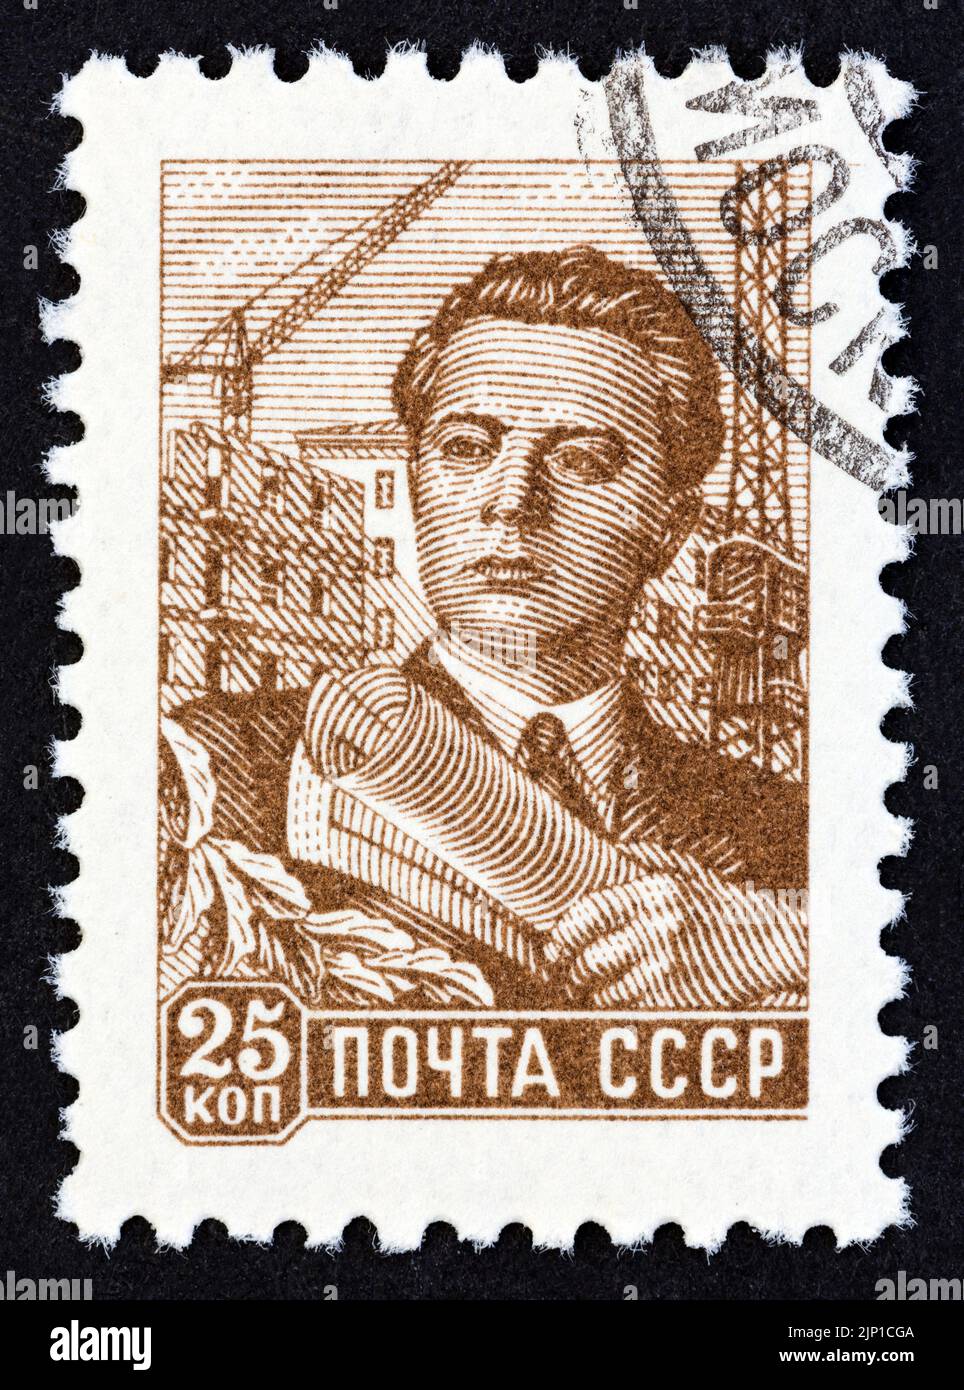 USSR - CIRCA 1959: A stamp printed in USSR shows architect, circa 1959. Stock Photo